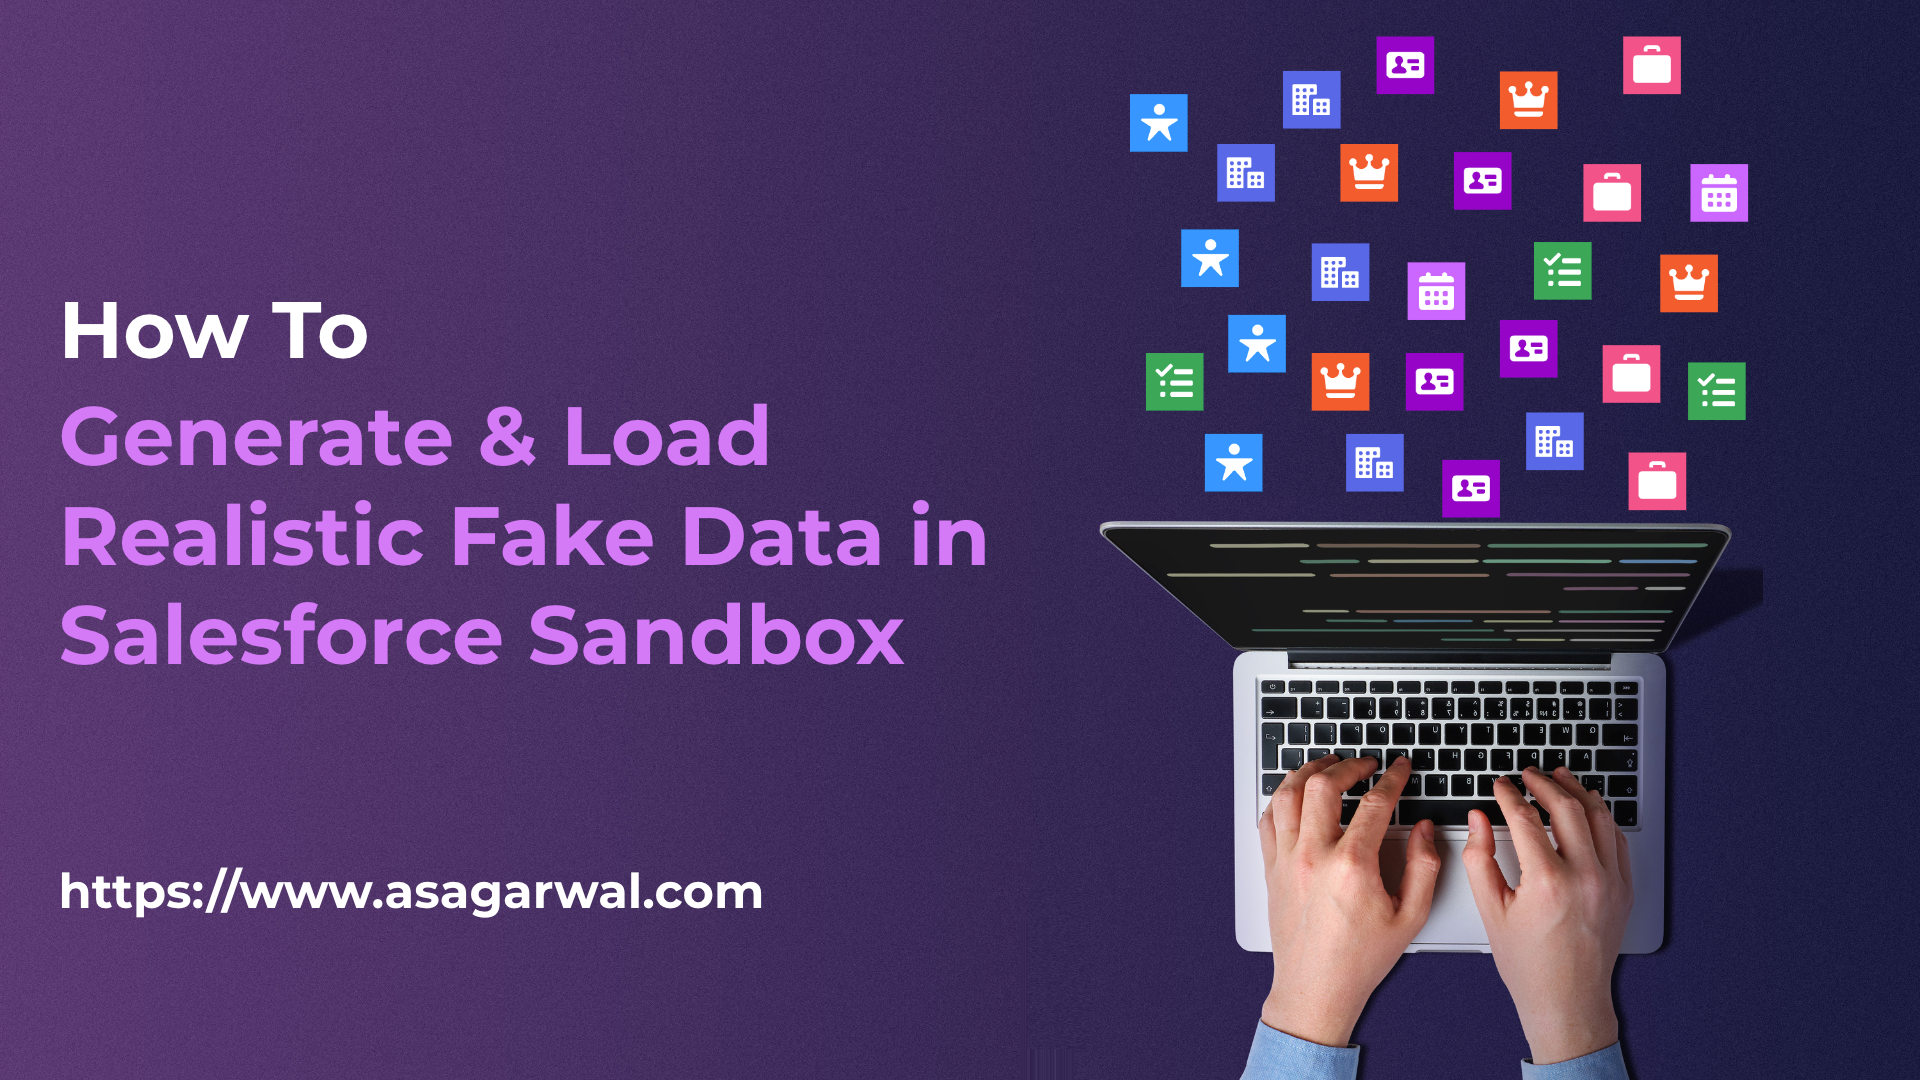 How To Generate & Load Realistic Fake Data in Salesforce Sandbox